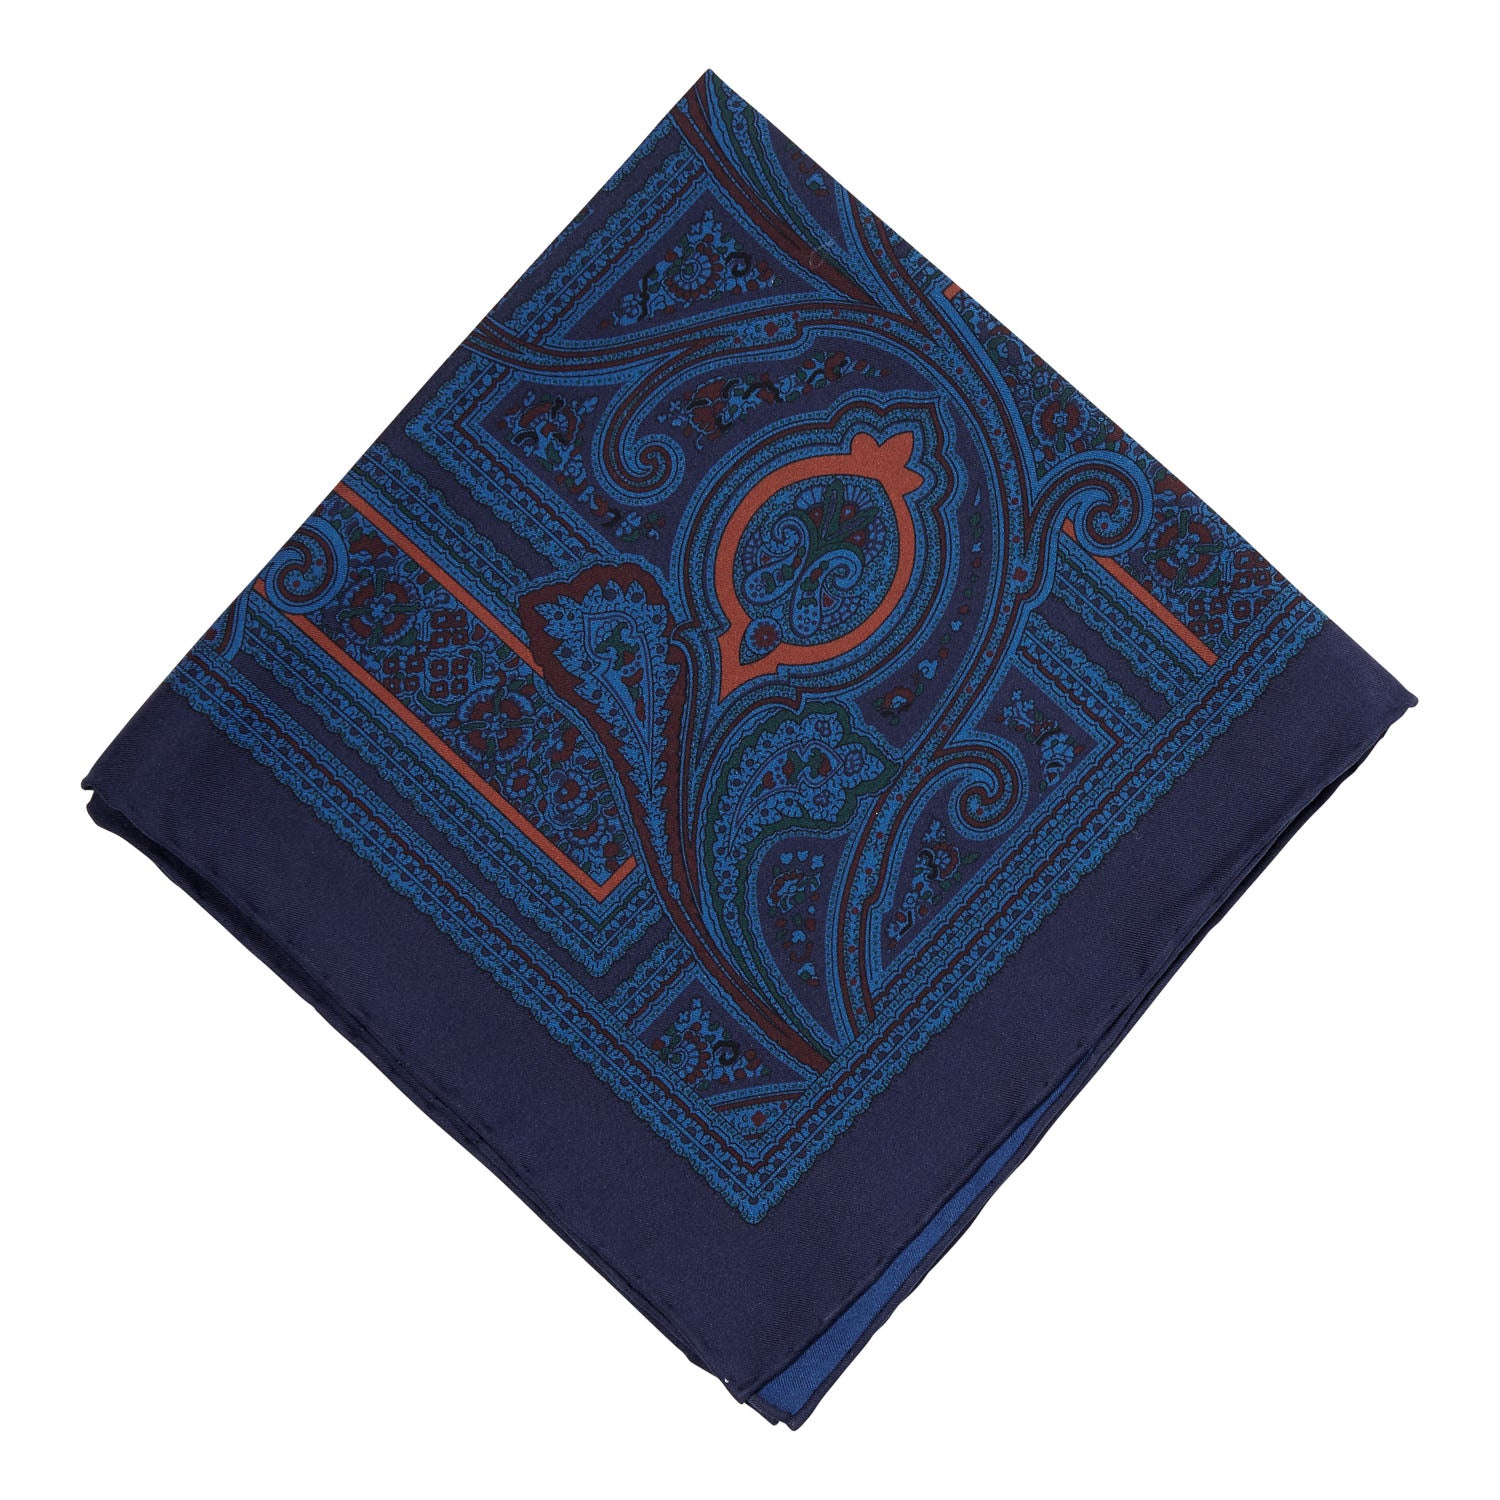 A Sovereign Grade Ancient Madder Midnight Pocket Square, by KirbyAllison.com, with hand-rolled edges in a blue and orange paisley pattern.